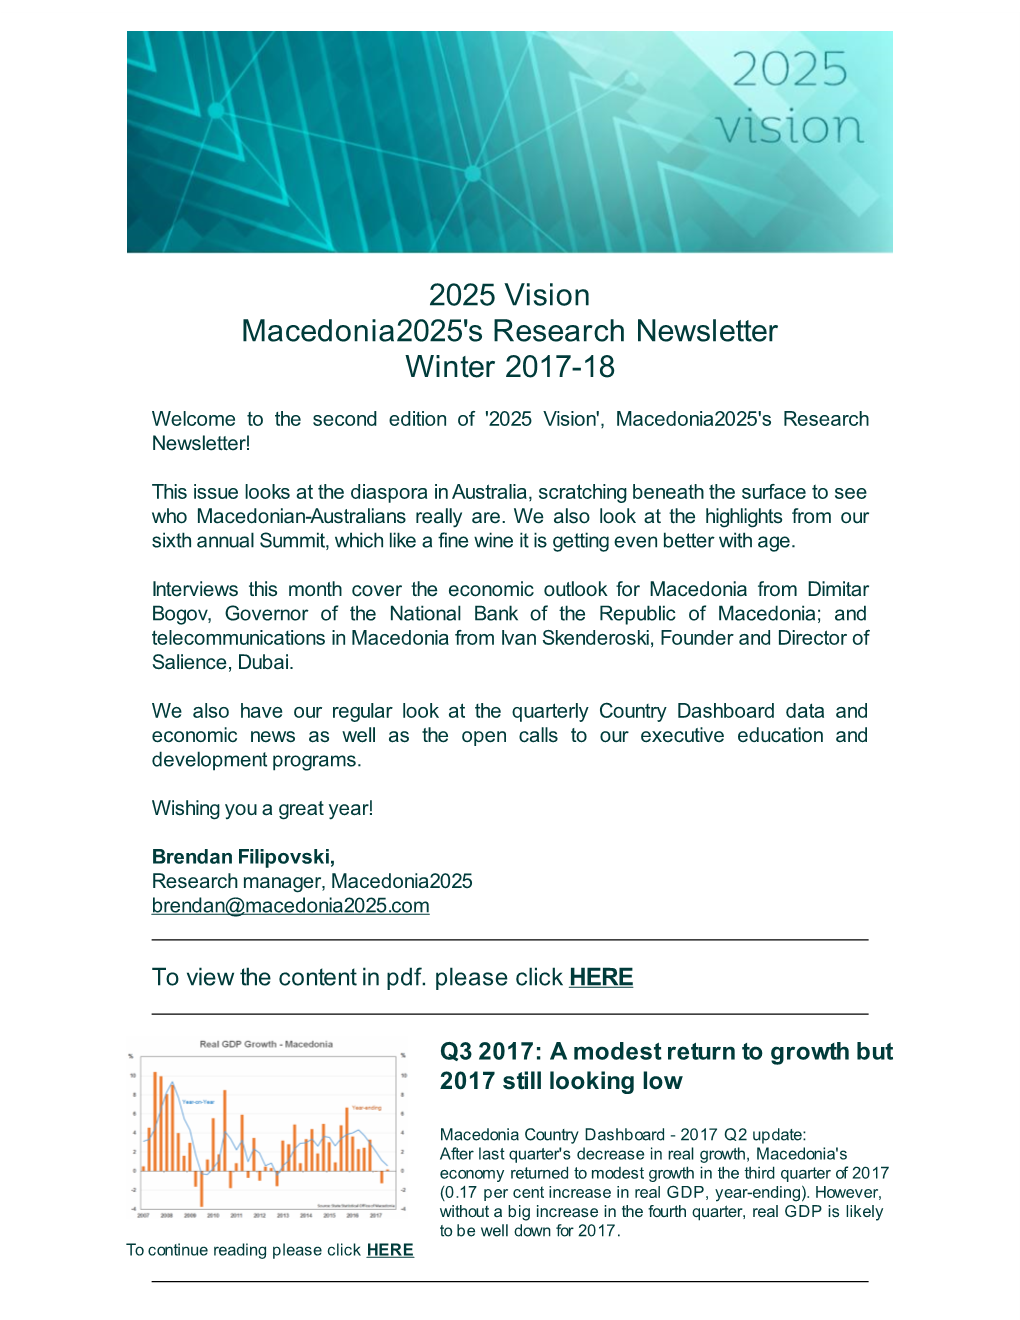 2025 Vision Macedonia2025's Research Newsletter Winter 2017-18